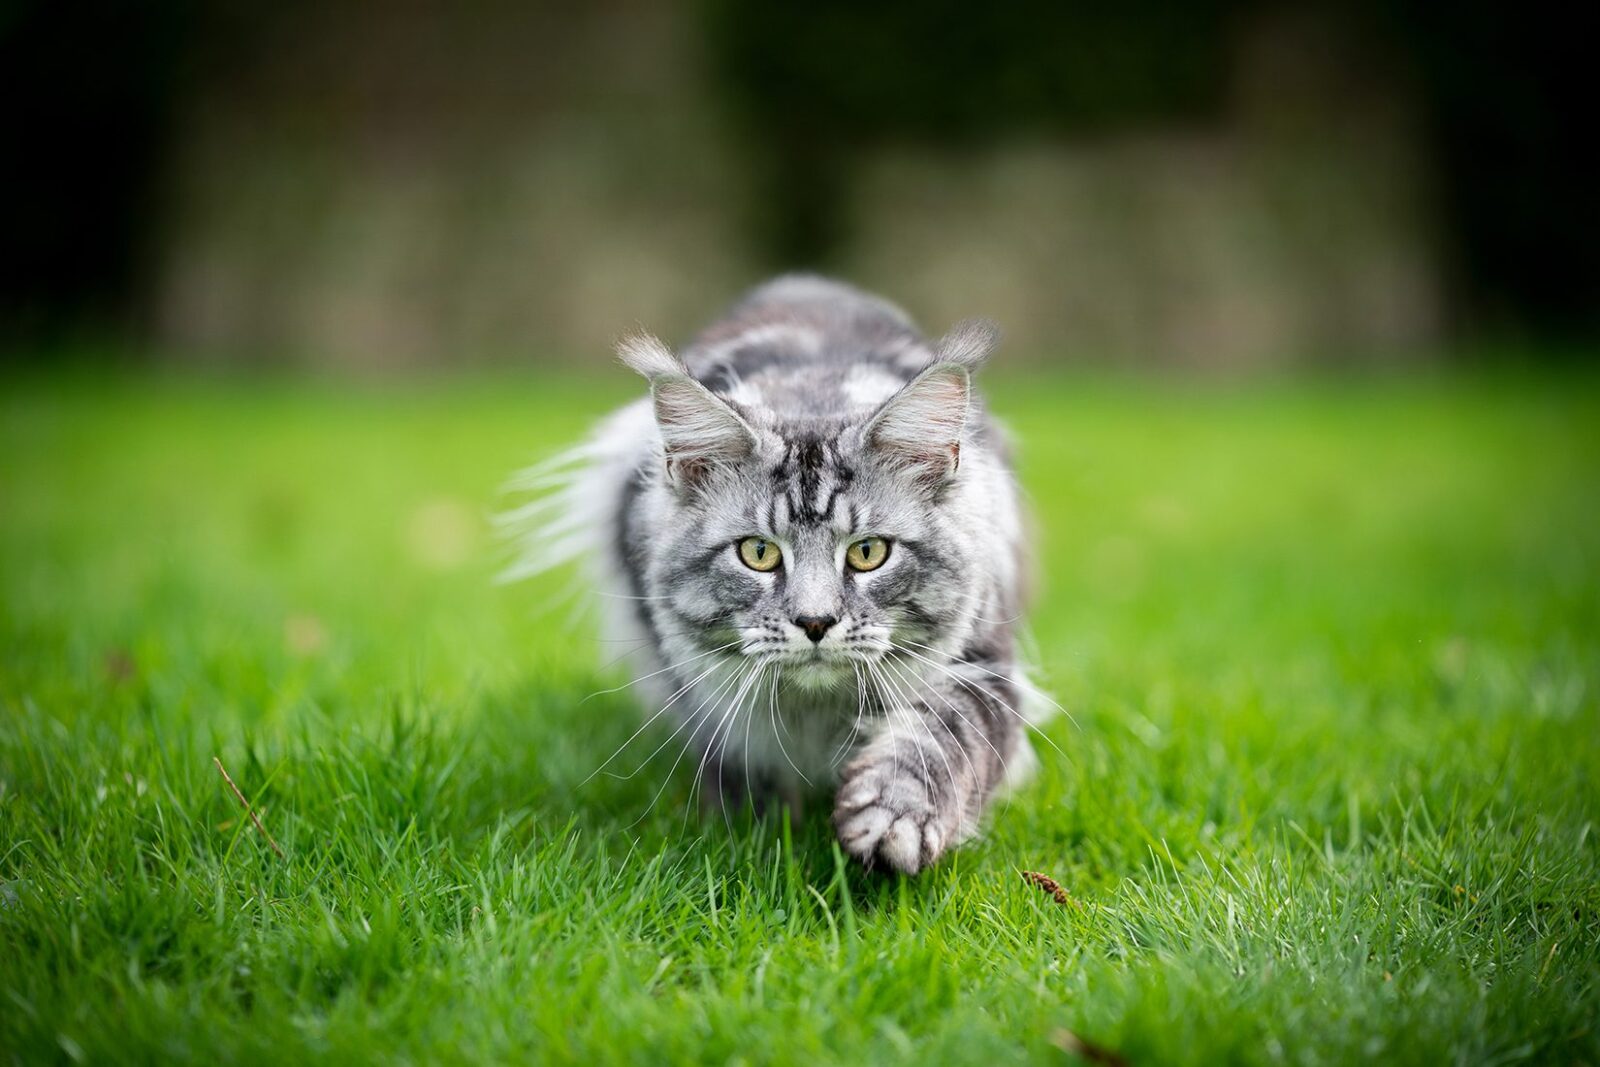 What Cat Personality Do You Have? Cat hunting